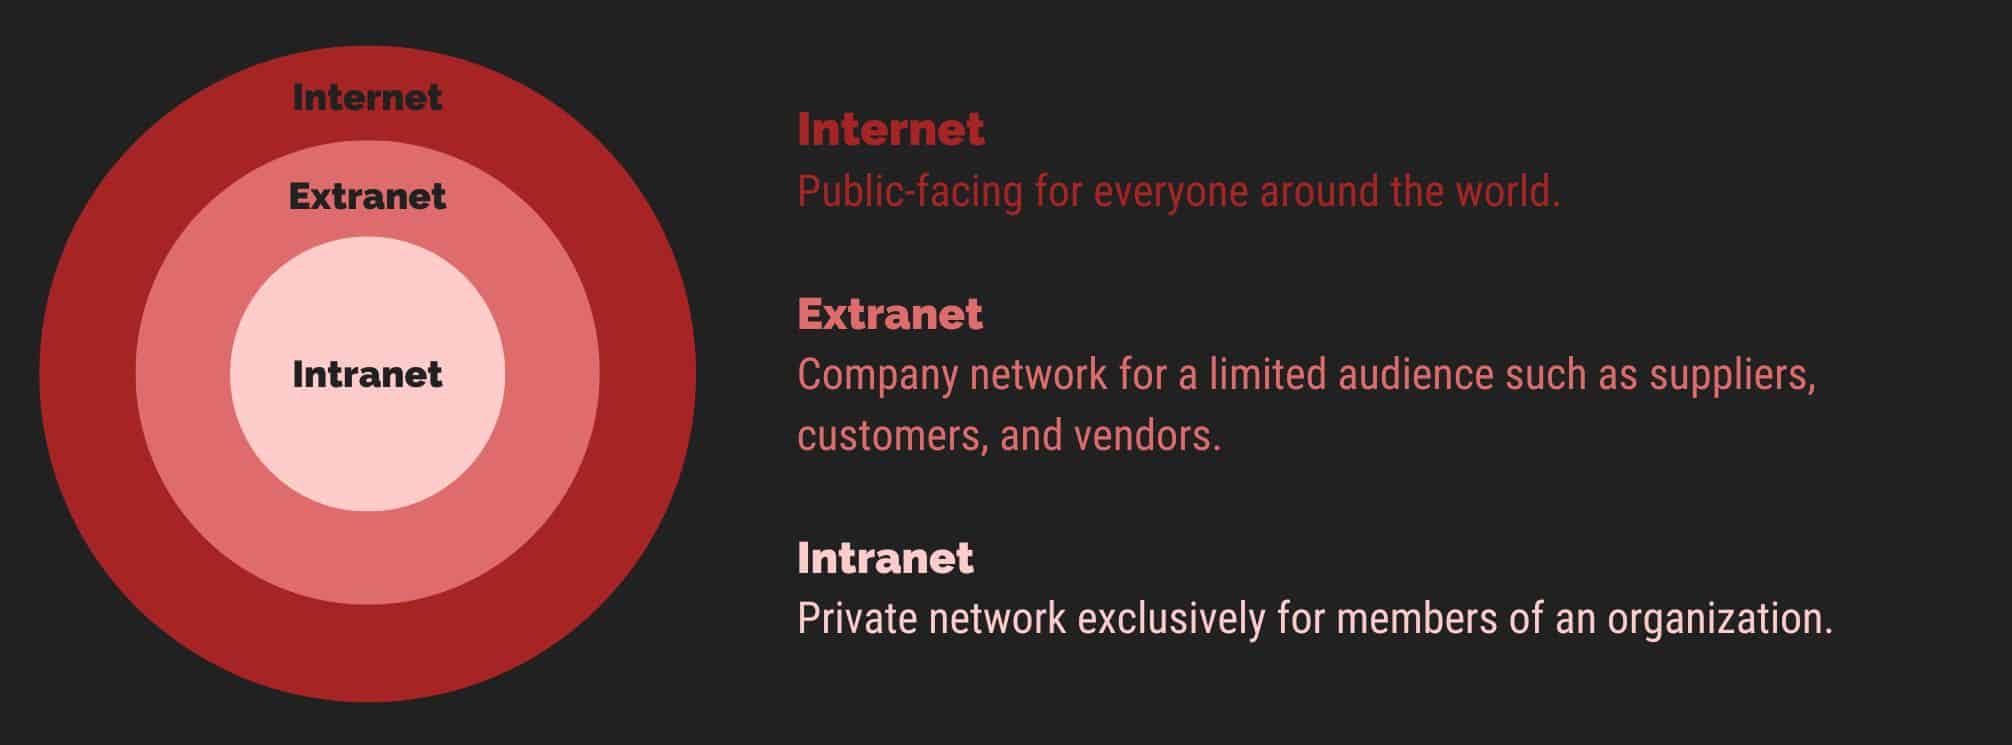 difference between intranet, extranet, and internet diagram.